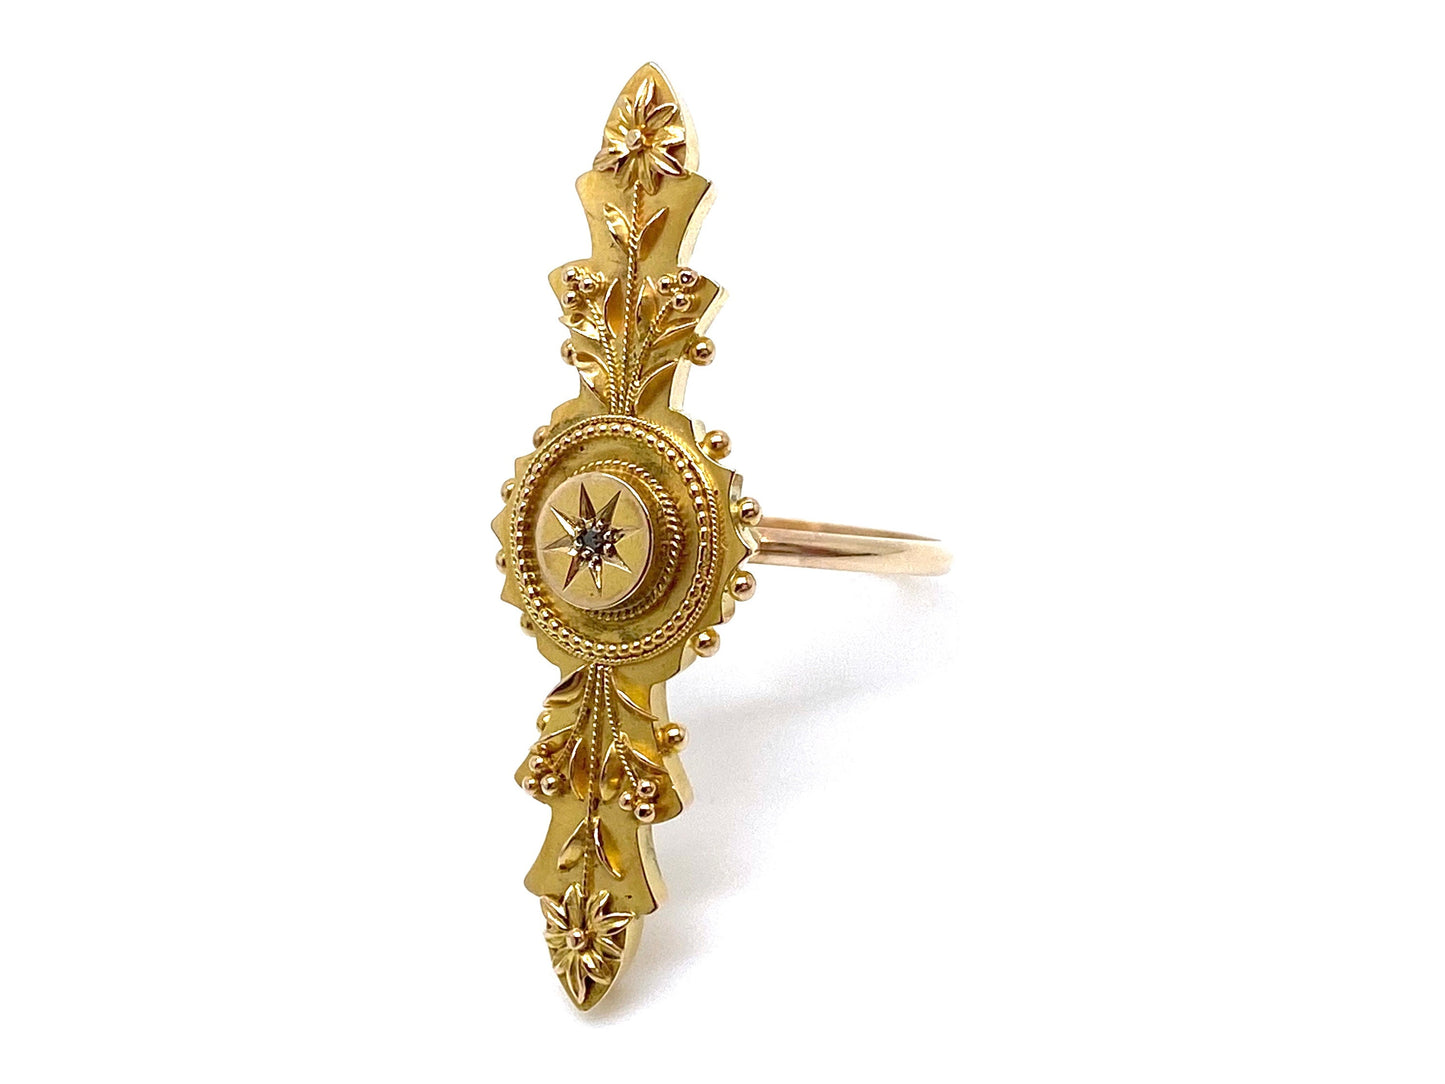 reimagined V I N T A G E / Victorian full finger ring / 15ct gold with a mine cut diamond / size 7.5